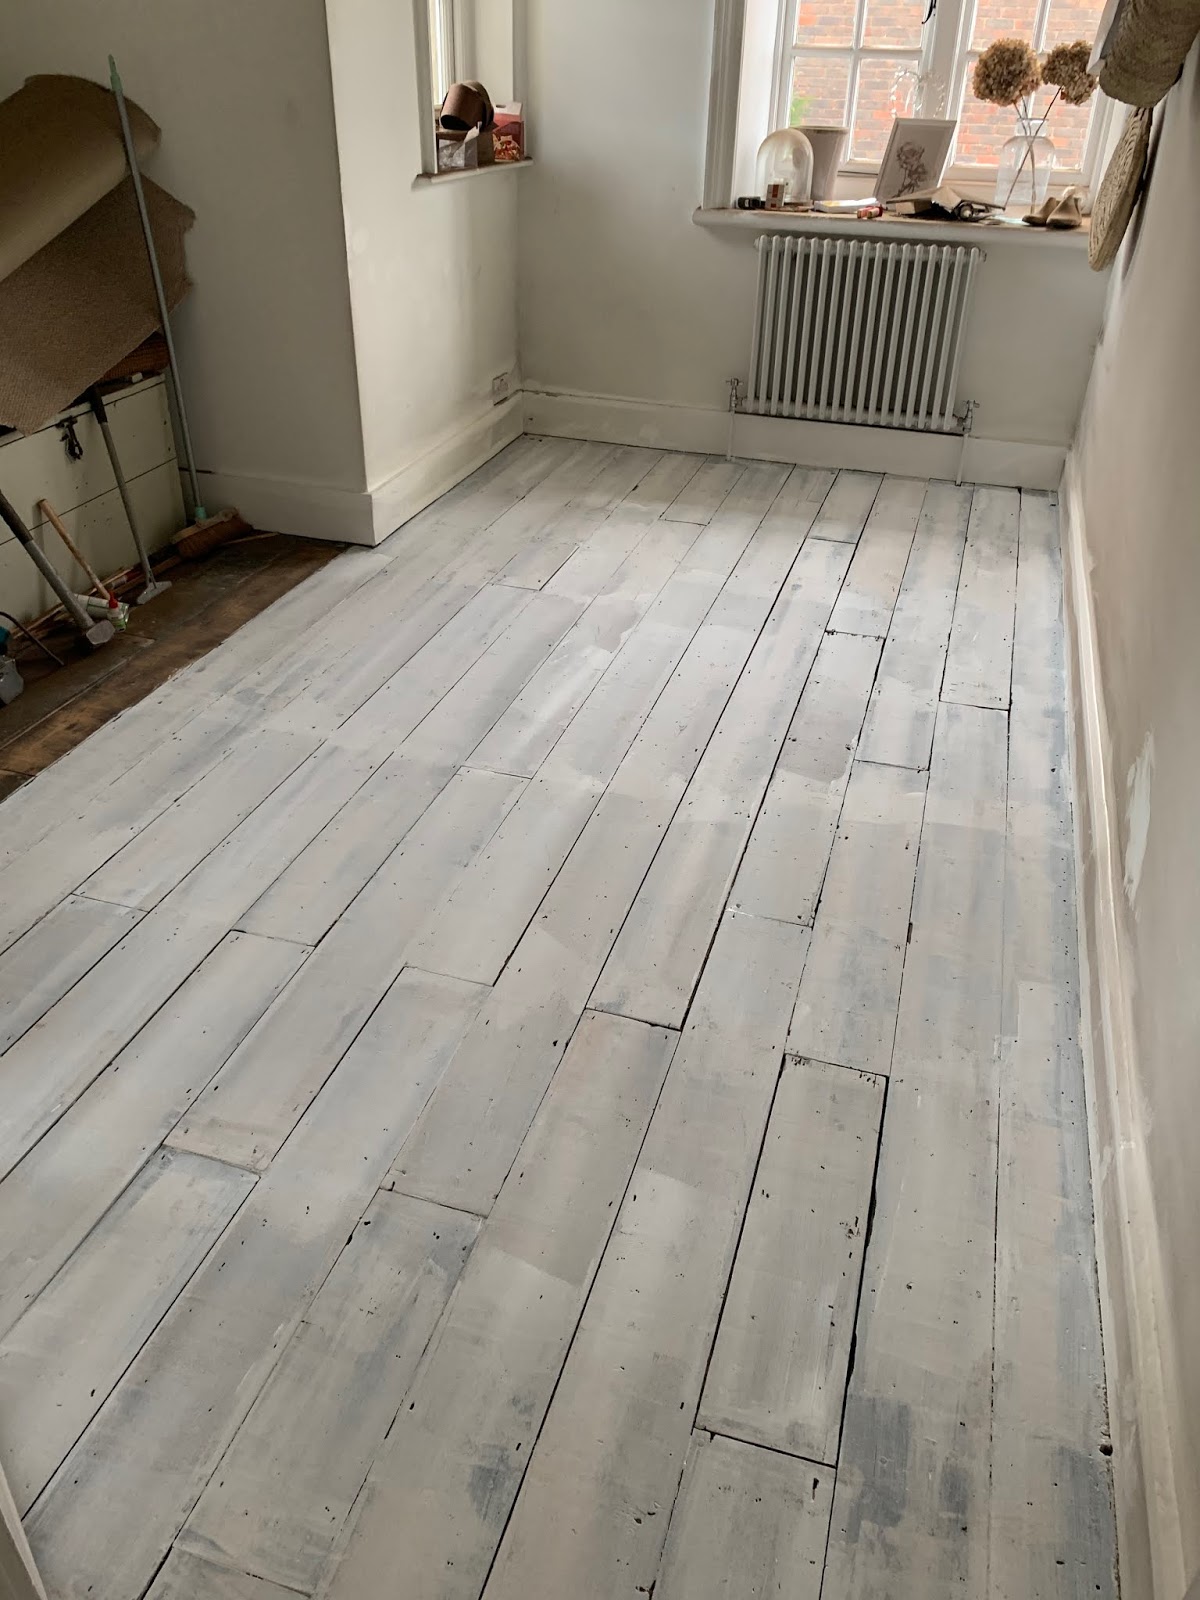 When Is It Better To Paint Wood Flooring?